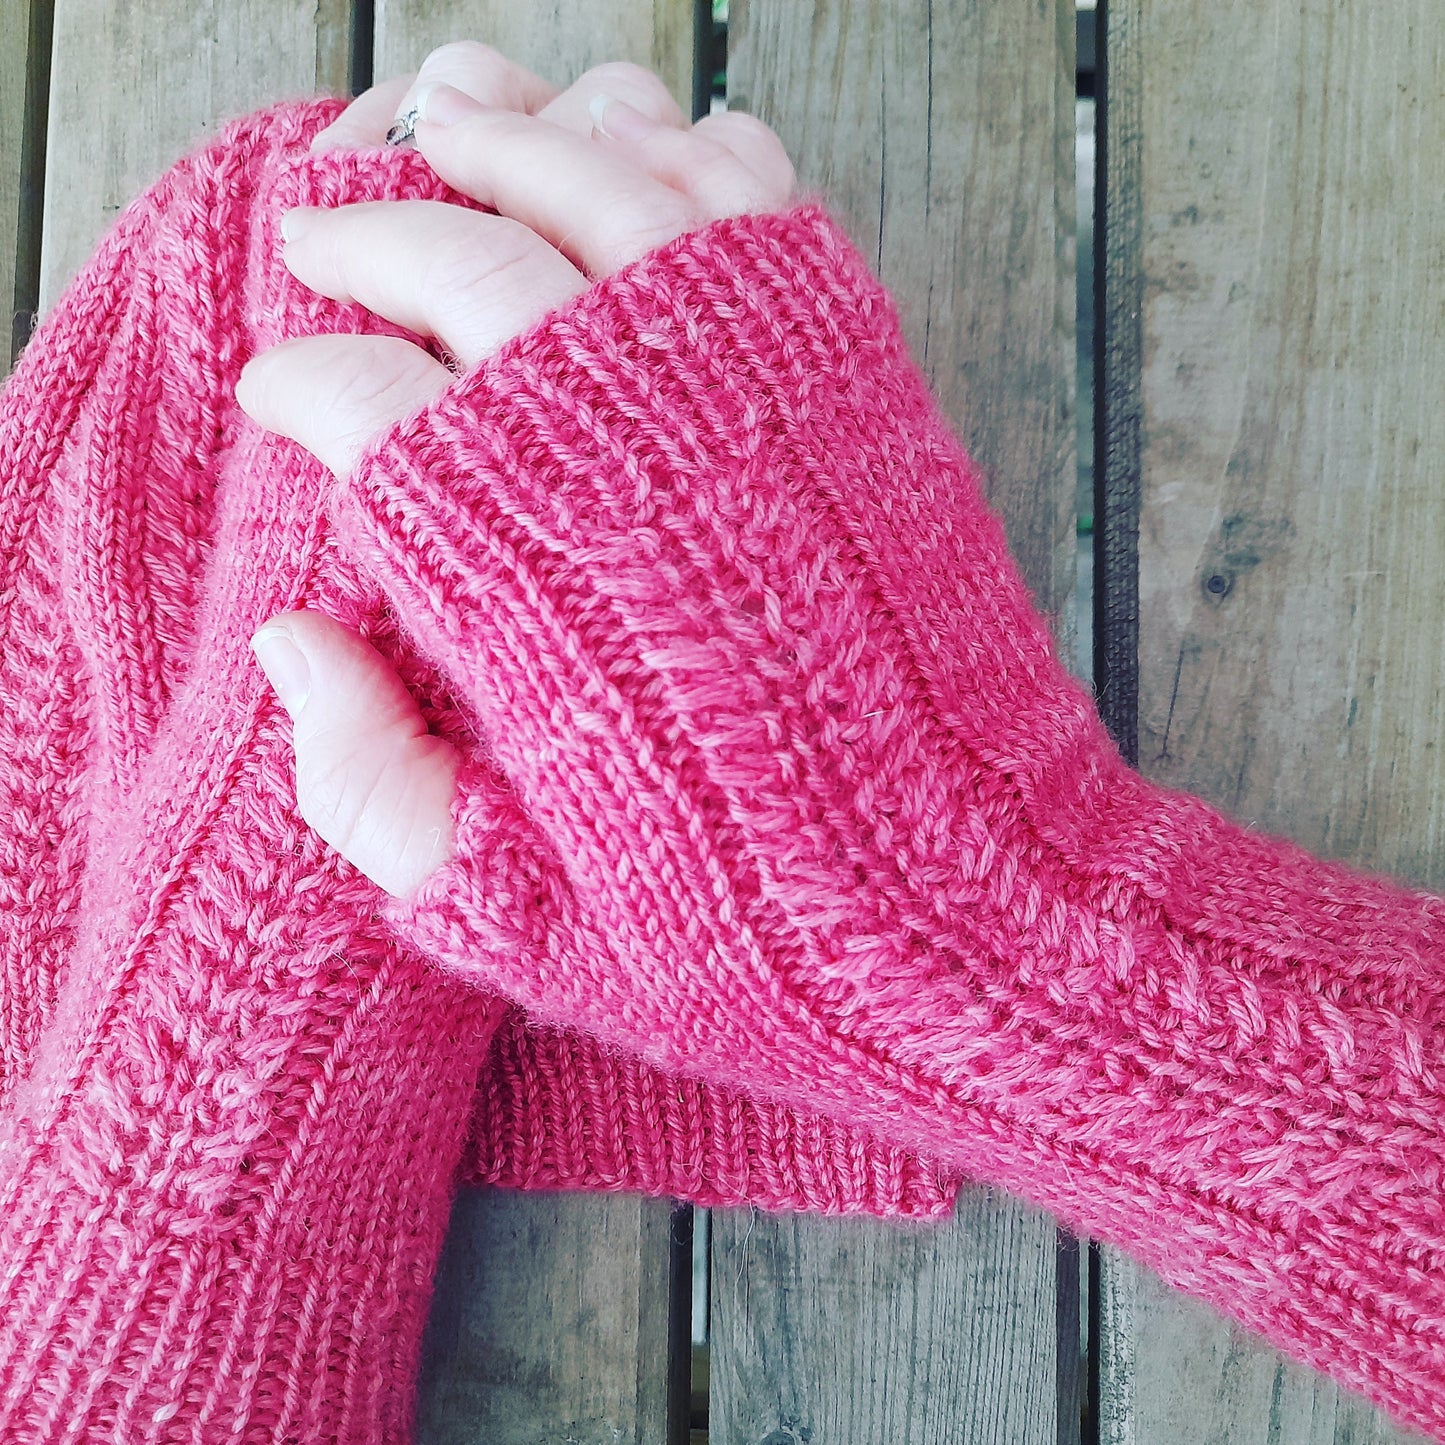 Cable knit fingerless gloves pattern pdf. DK patterns for women.  Hatchmere quick cable knit hat and gloves. Eden cottage yarns Bowland DK. 